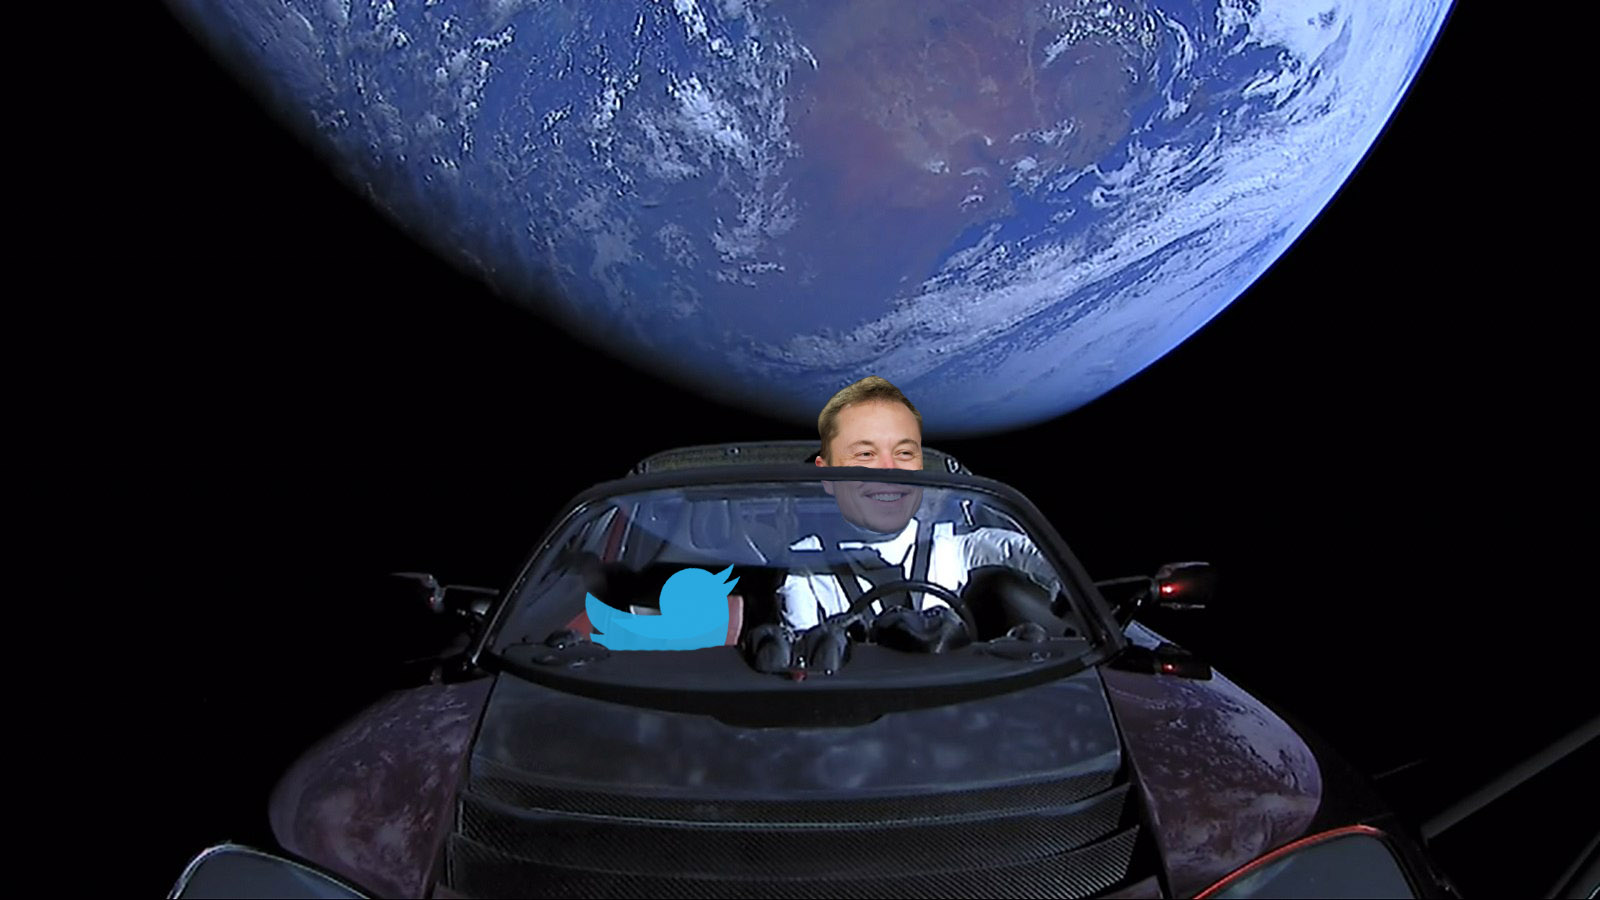 Elon Musk rides in his Tesla in space, the Twitter bird logo by his side